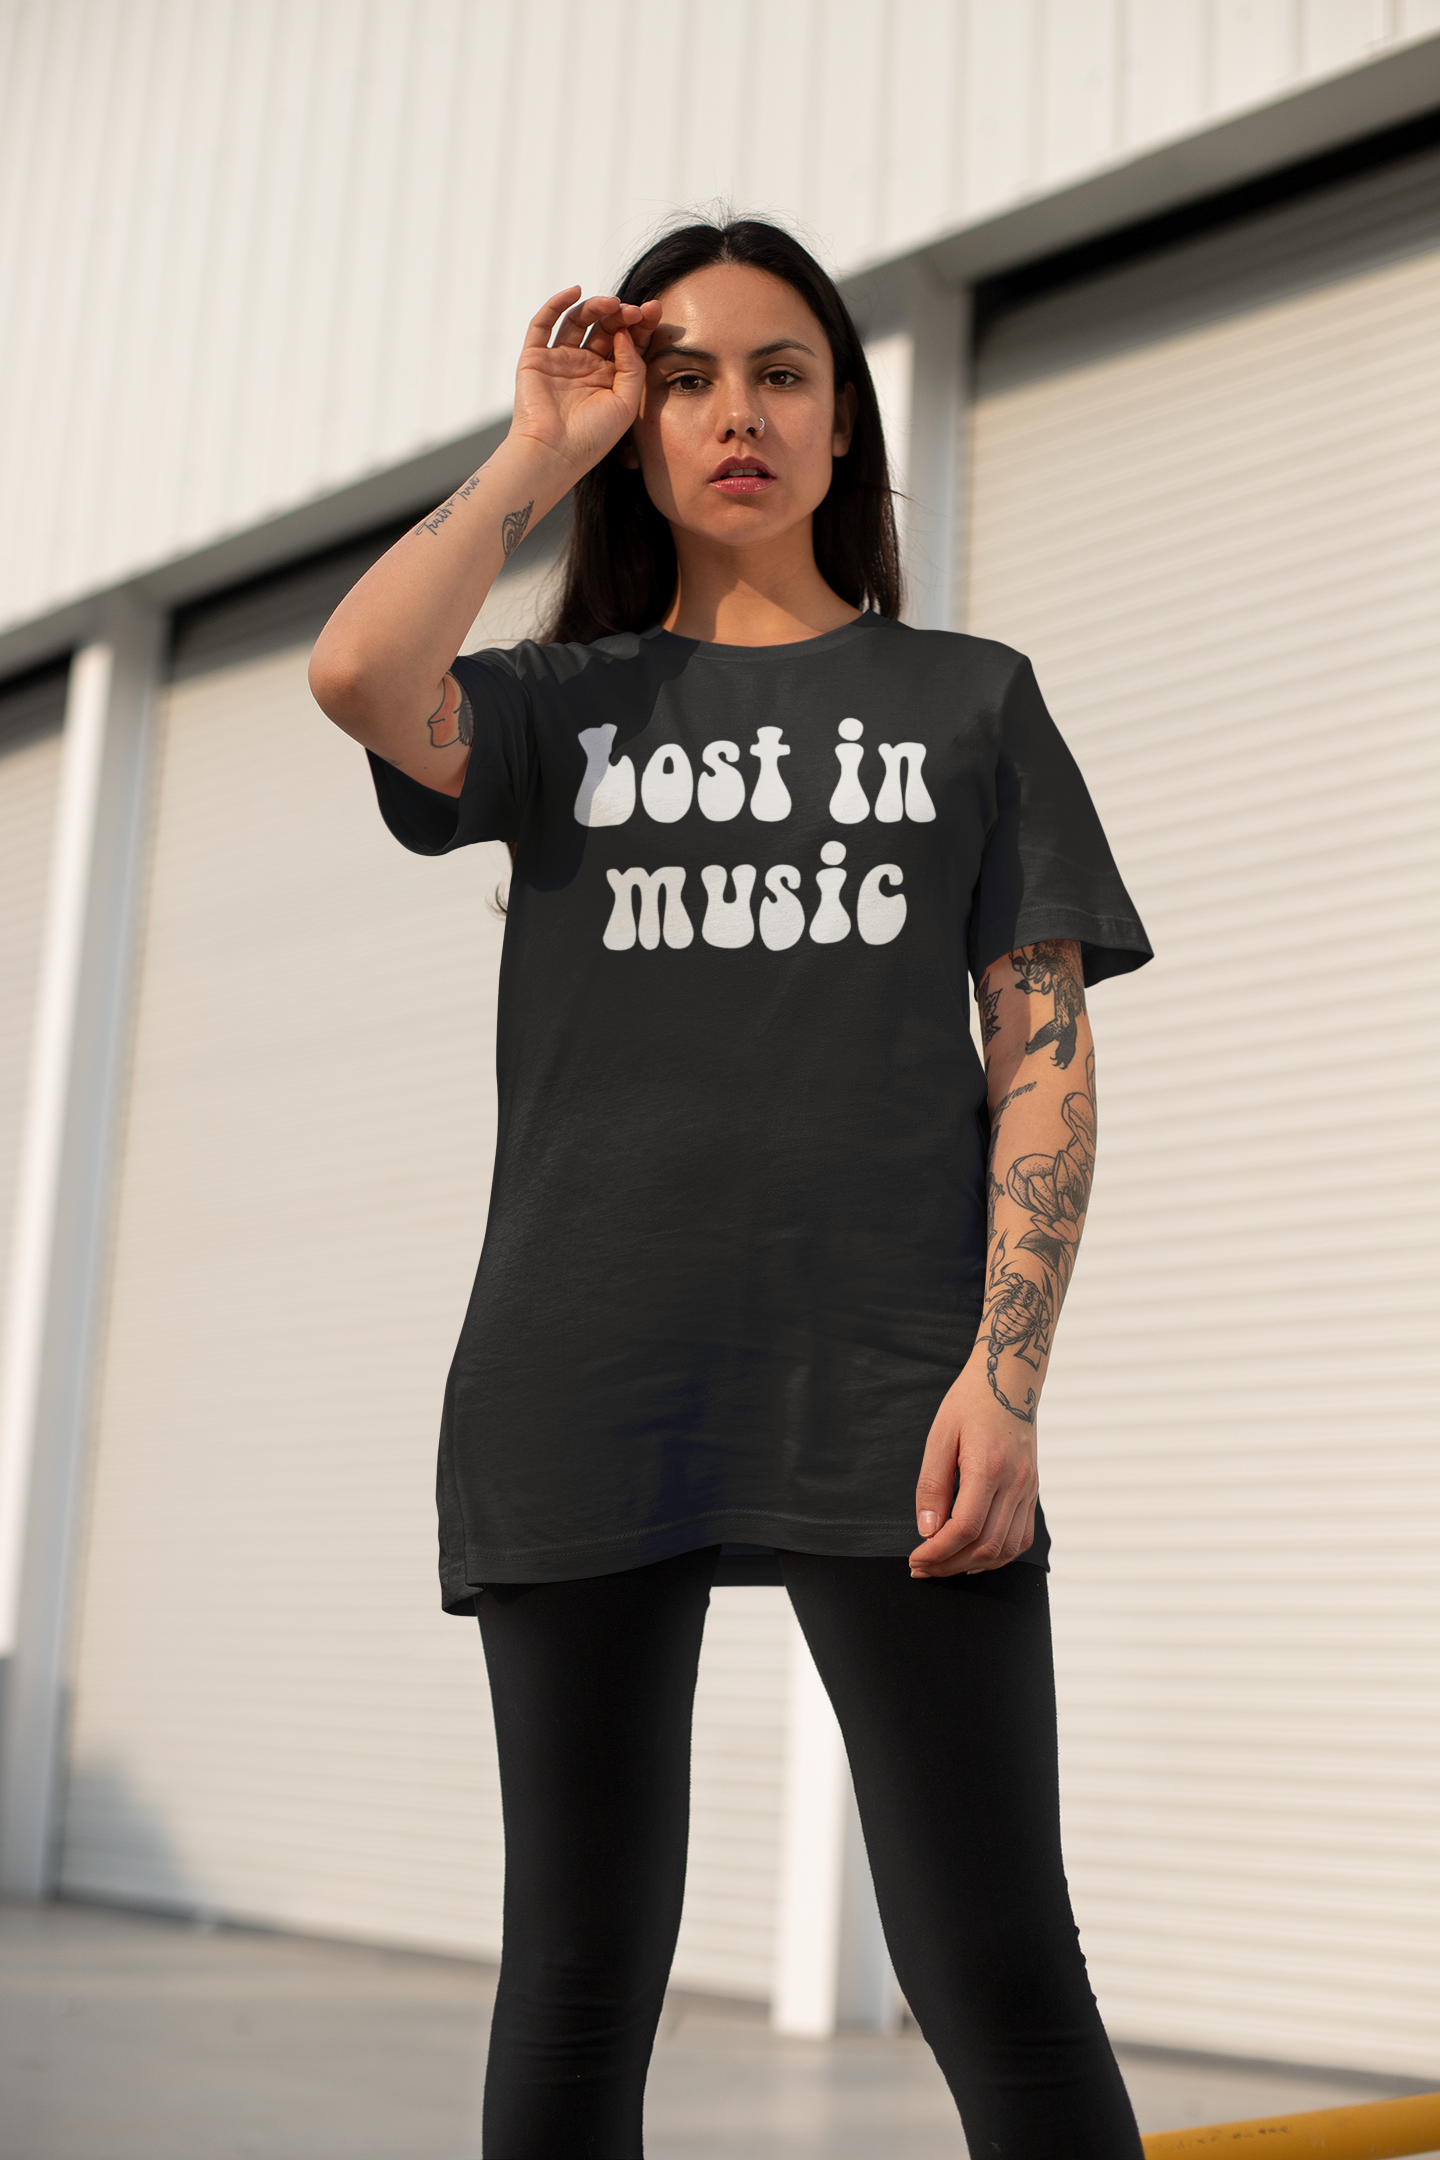 Lost In Music 70s Style Printed Unisex organic cotton t-shirt